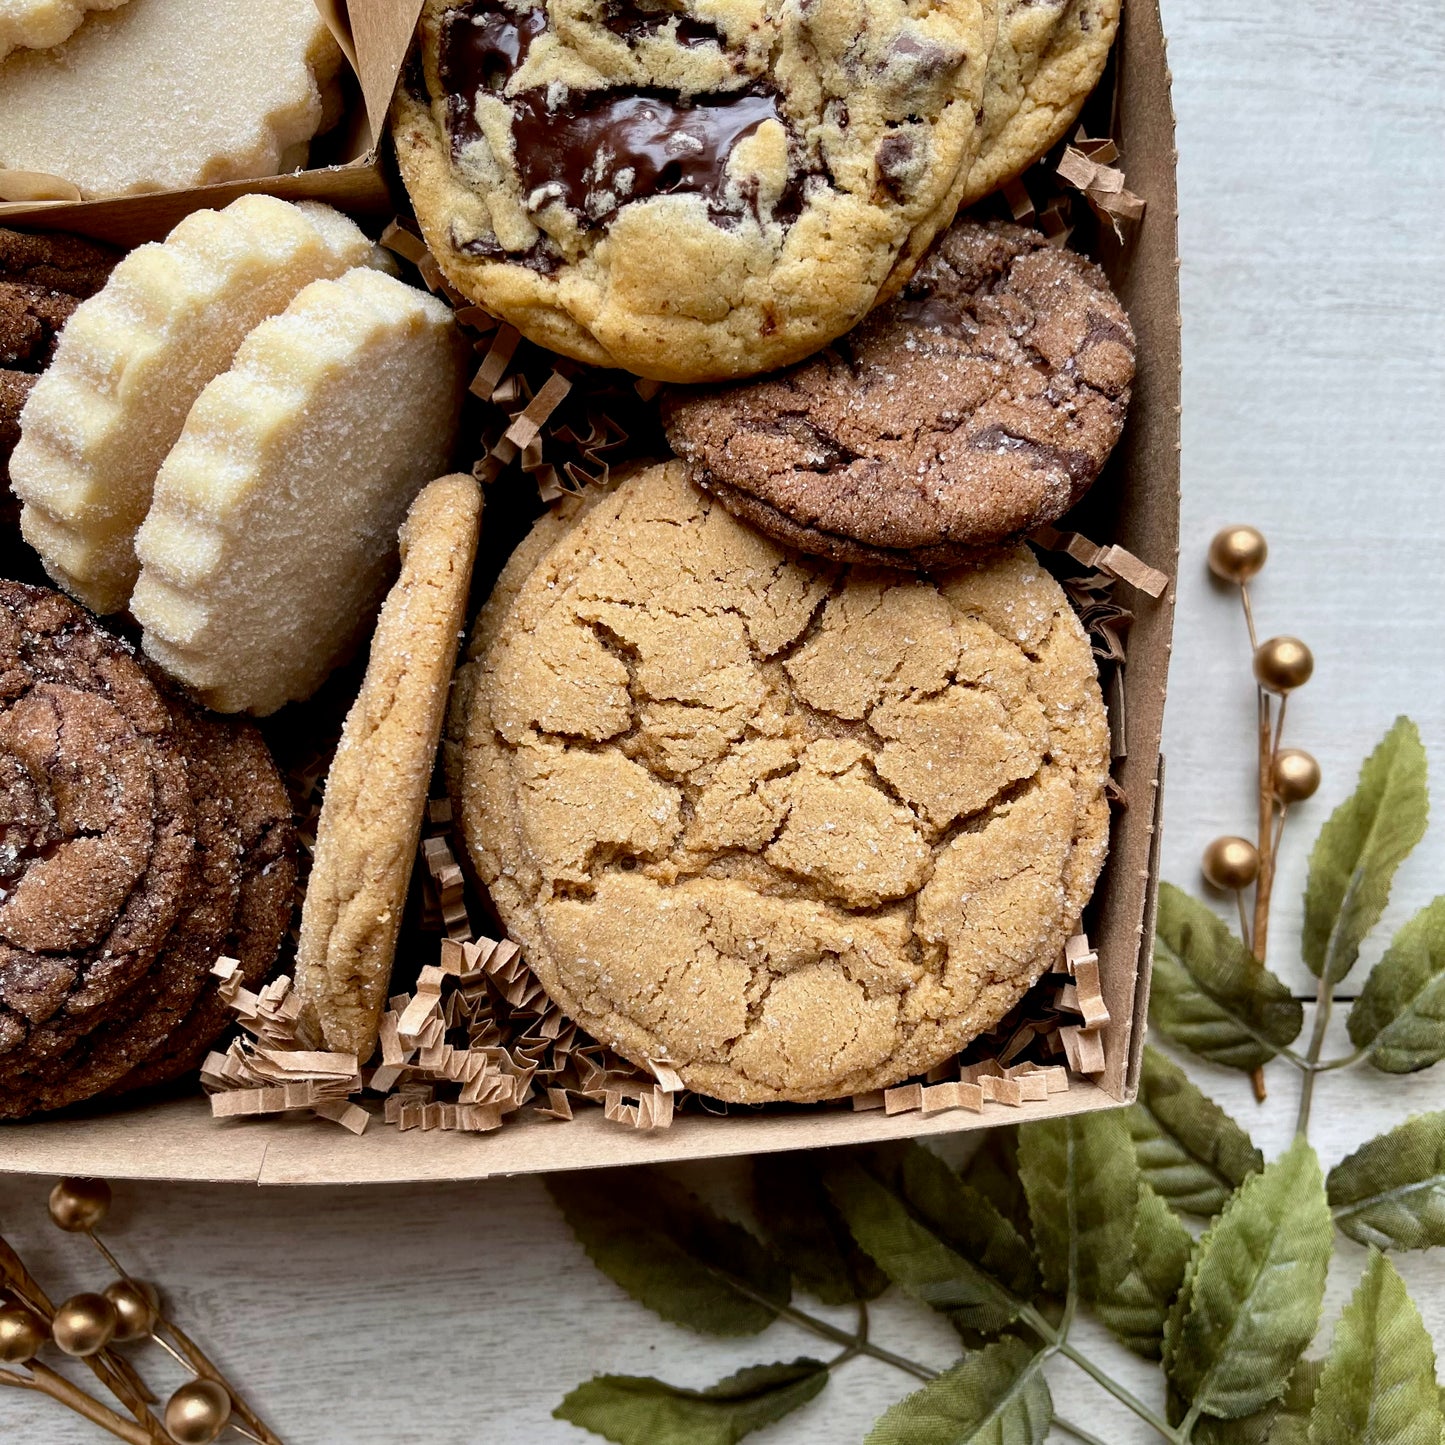 Holiday cookie gift box with chocolate ginger cookies, vanilla shortbread, brown sugar cookies, and chocolate chunk cookies.